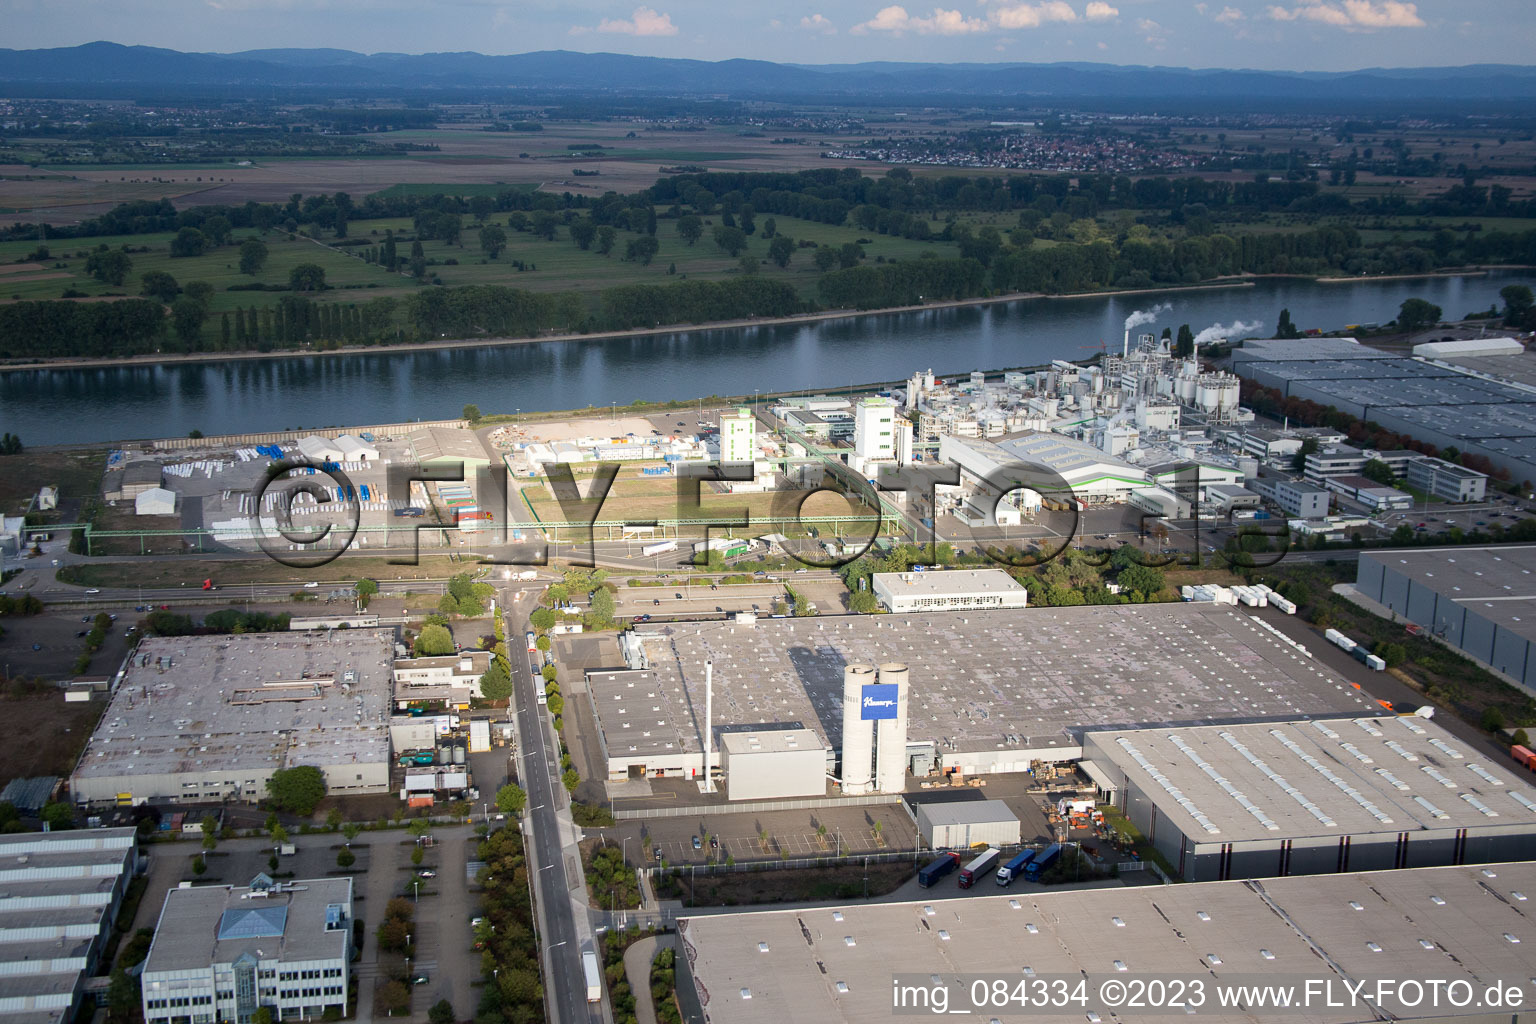 Drone image of North industrial area on the Rhine in Worms in the state Rhineland-Palatinate, Germany